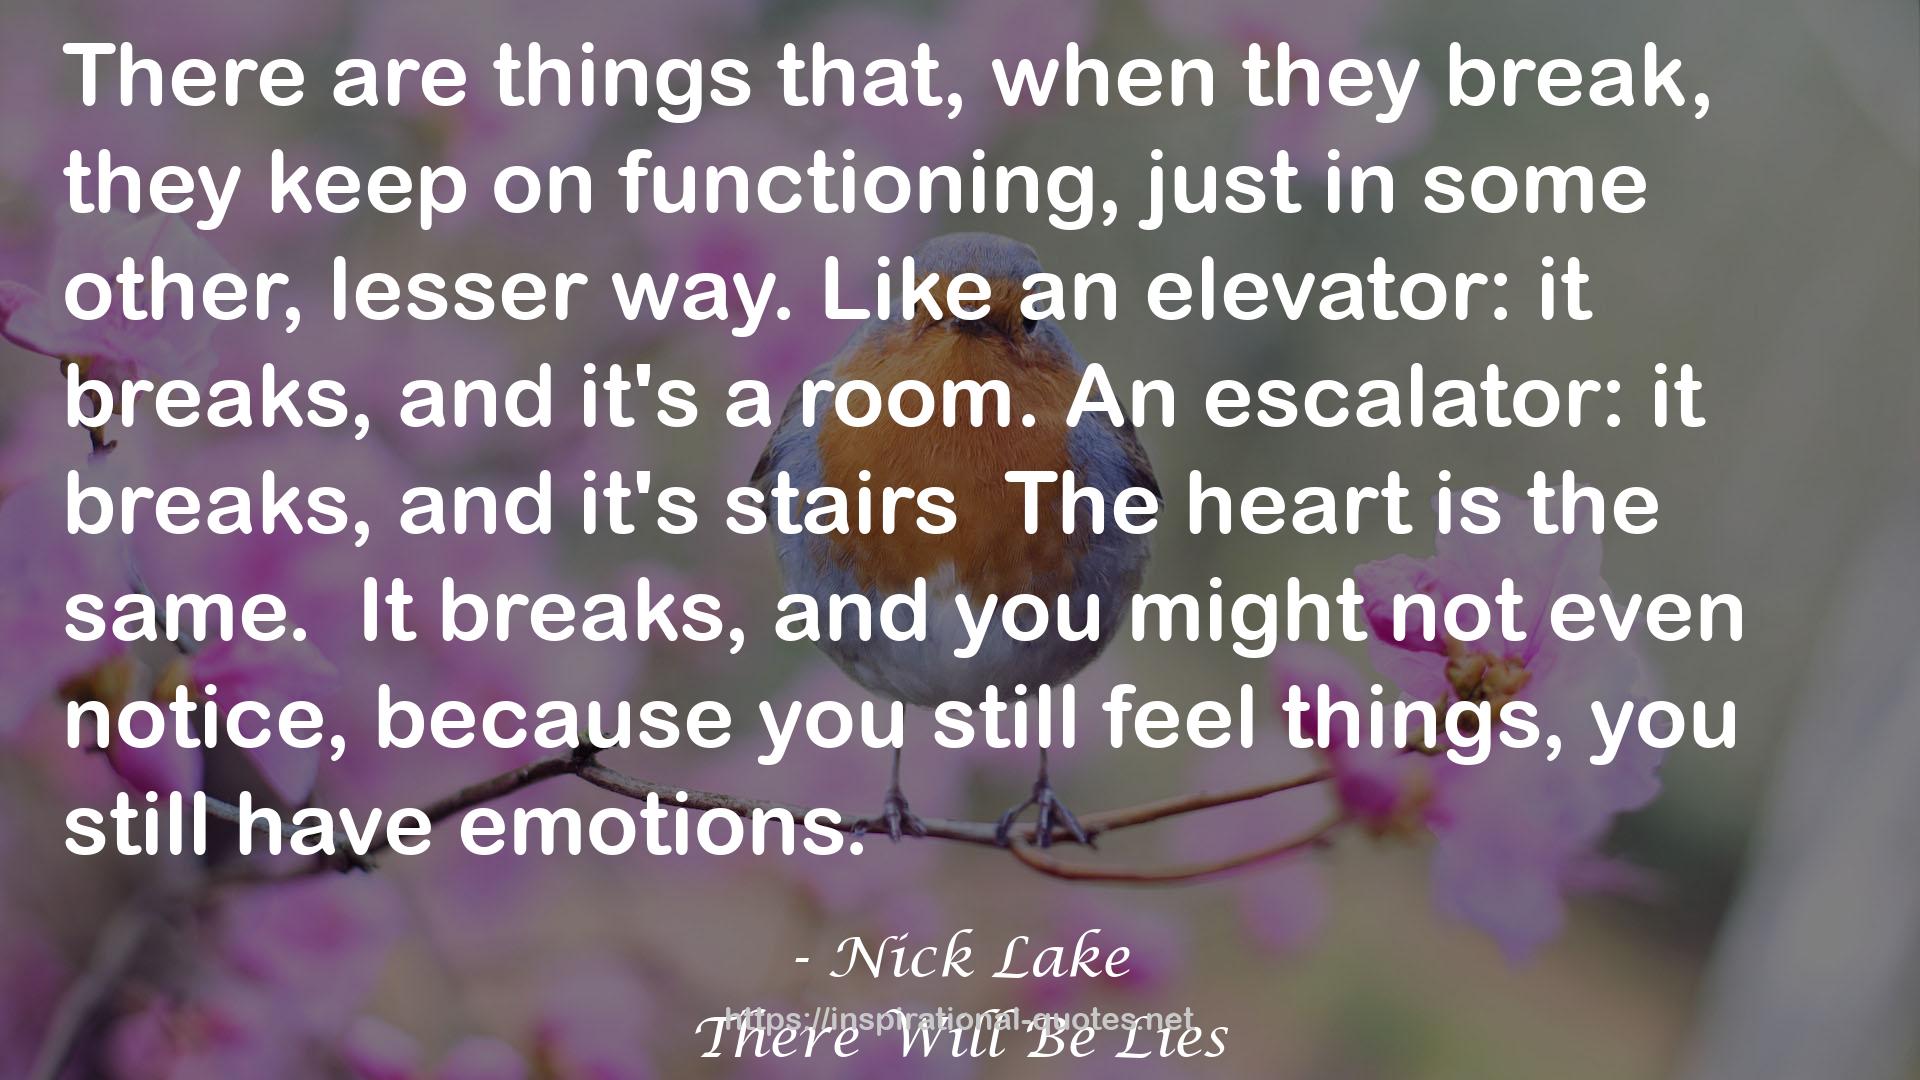 stairsThe heart  QUOTES